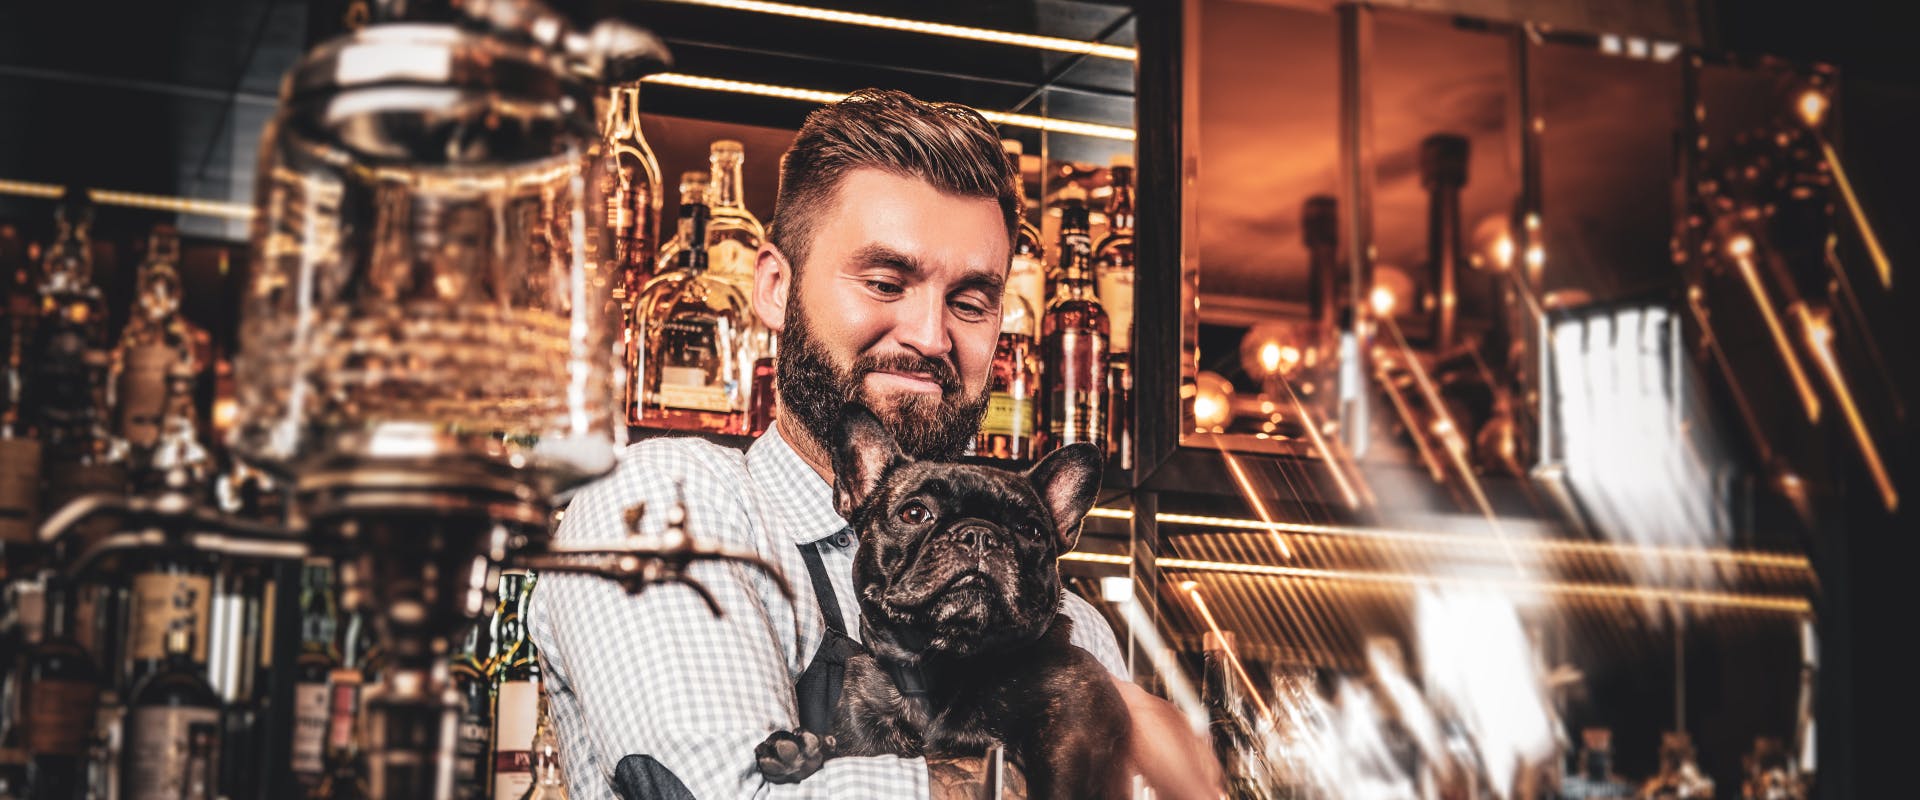 french bulldog being held by a barman in one of glasgows dog friendly pubs